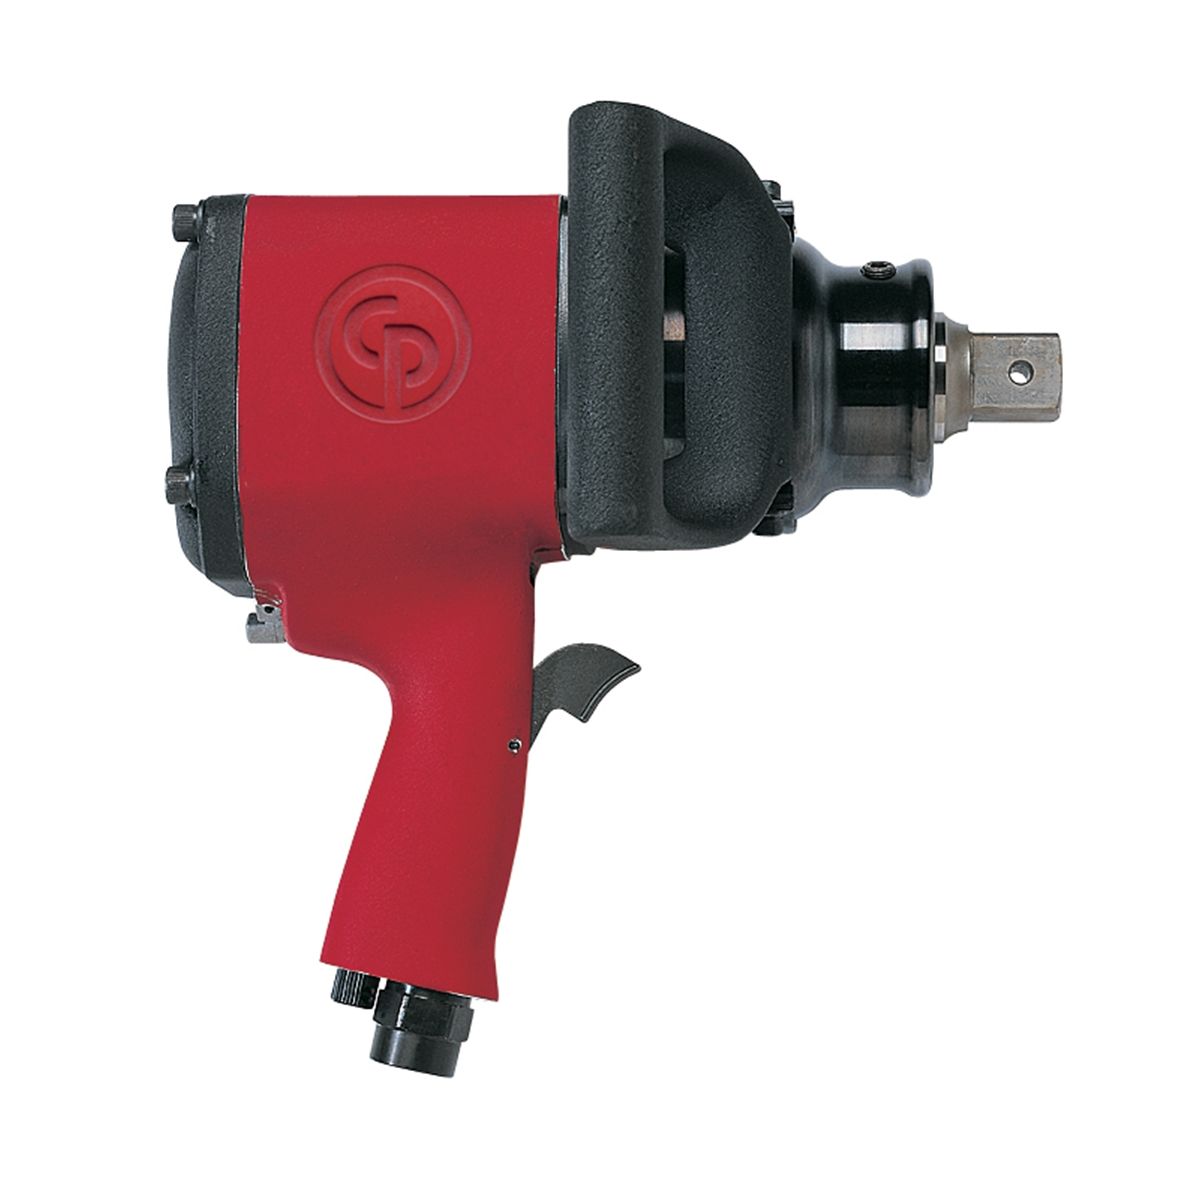 1" Inch Drive Extra Heavy Duty Air Impact Wrench CPT796